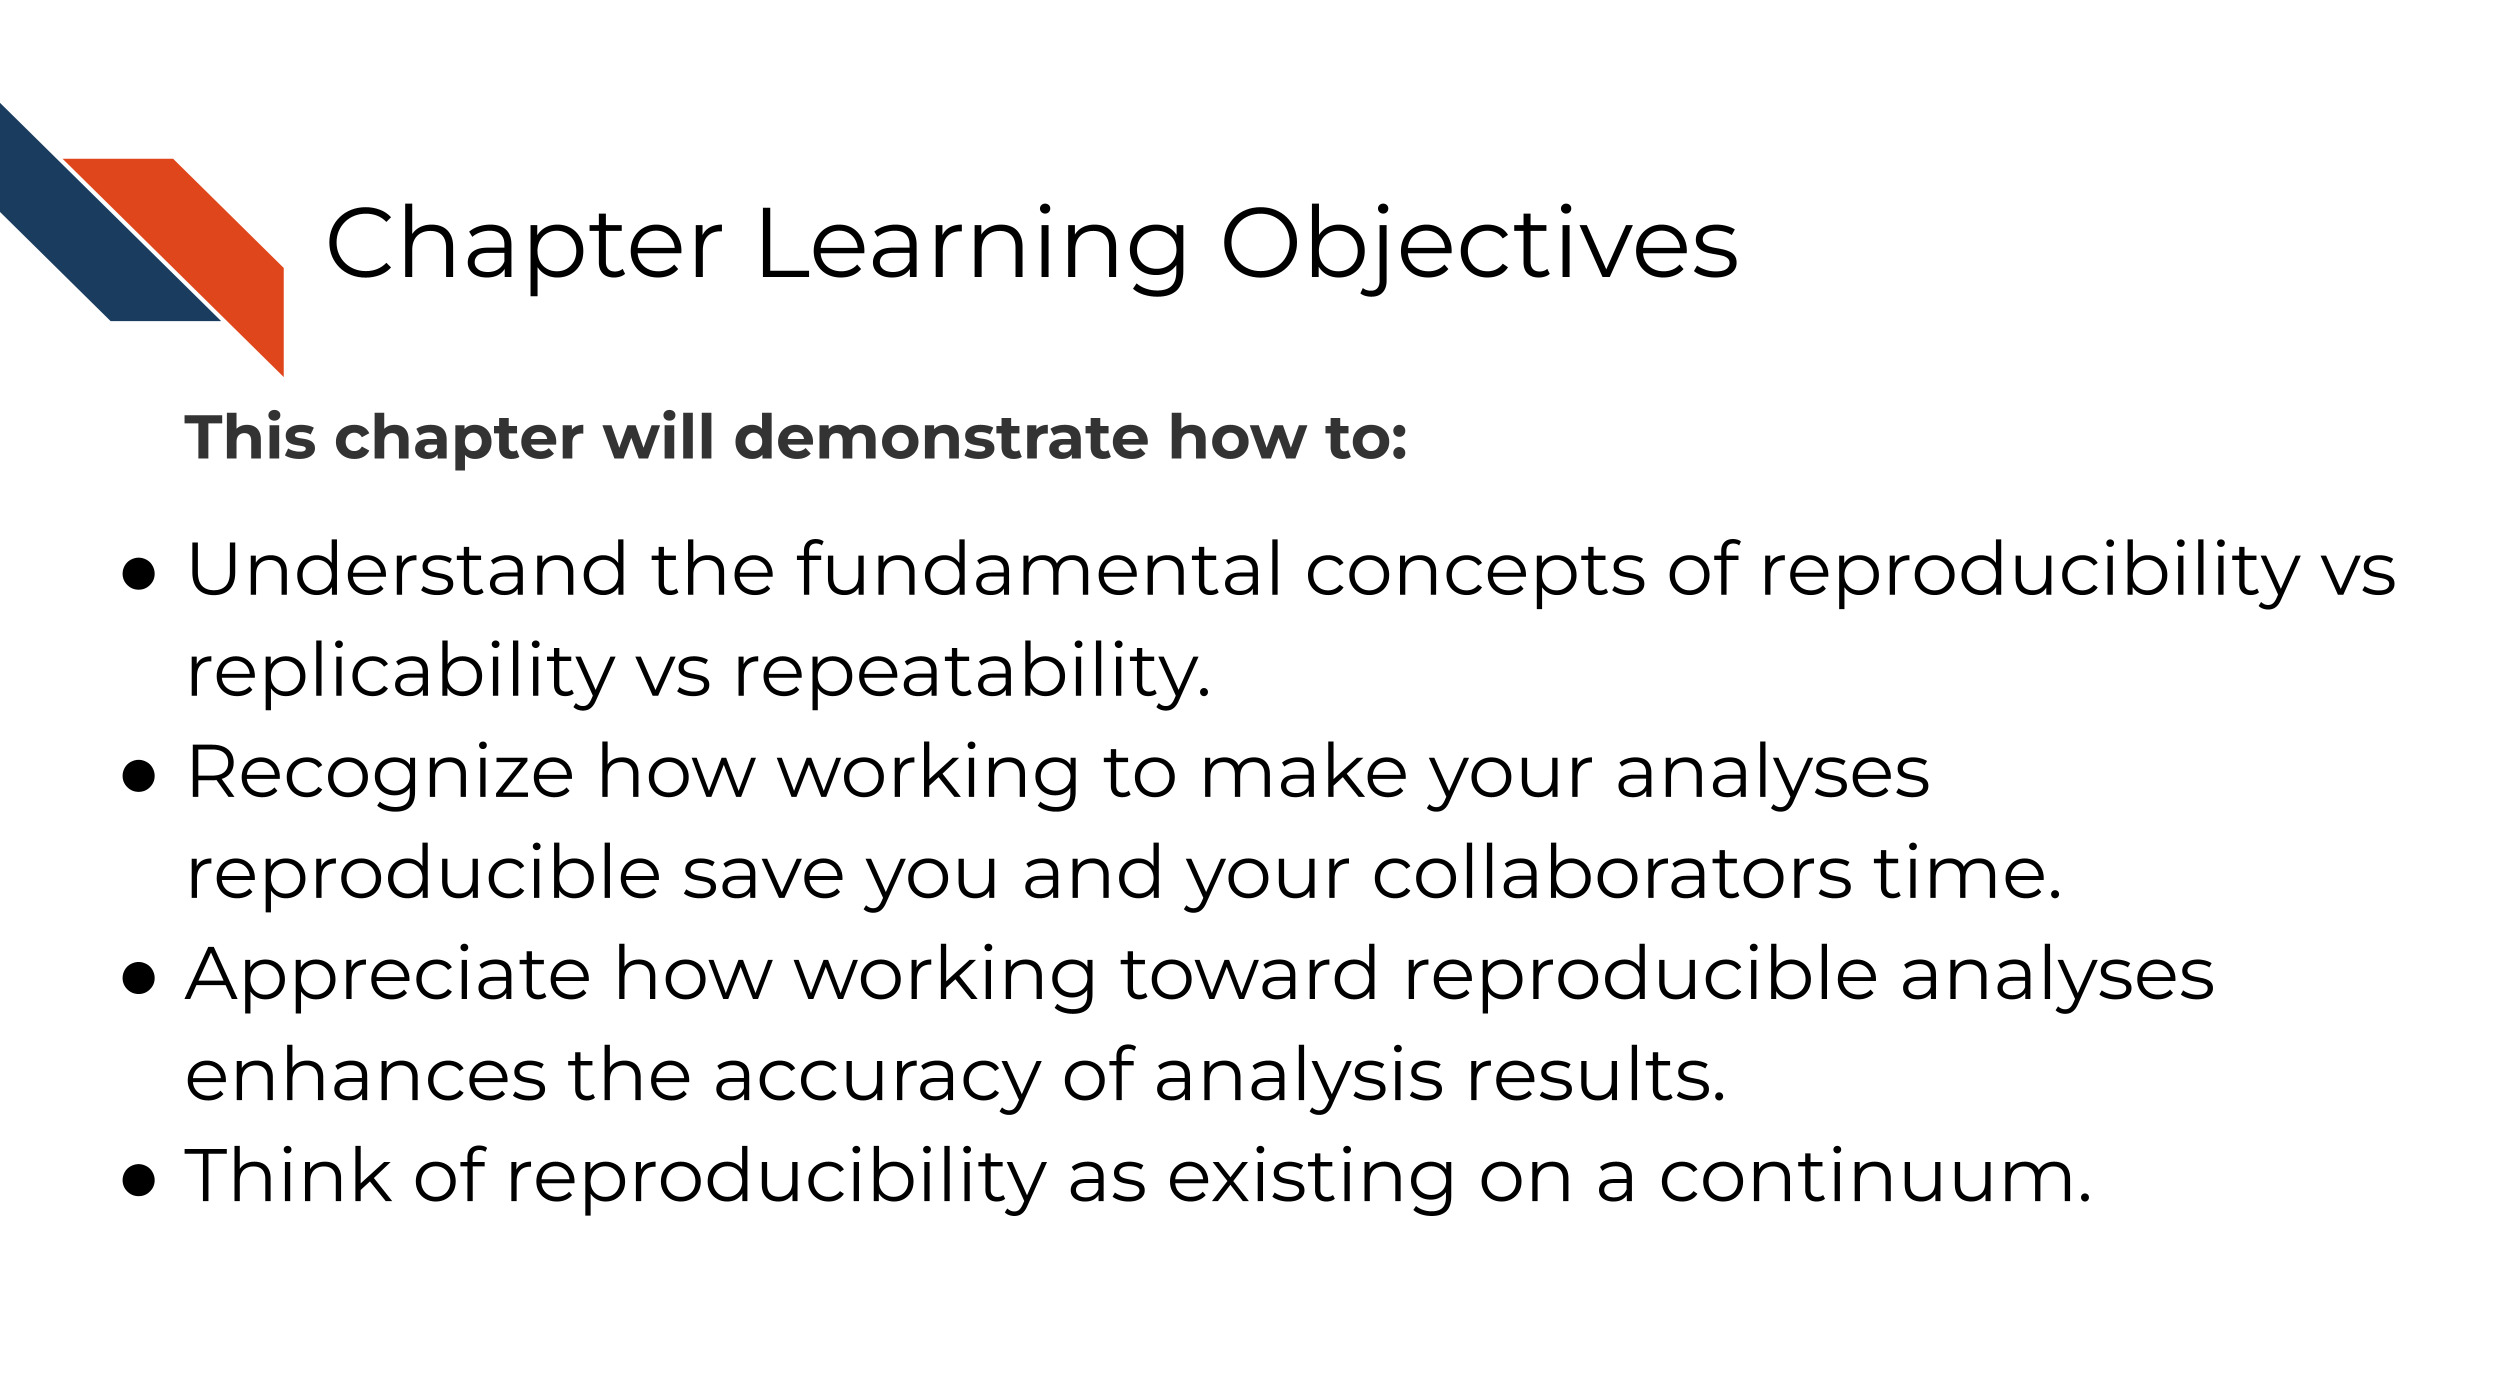 This chapter will demonstrate how to: Understand the fundamental concepts of reproducibility vs replicability vs repeatability. Understand how working to make your analyses reproducible save your time and the time of your collaborators. Understand how working toward reproducible analyses enhances the accuracy of analysis results.